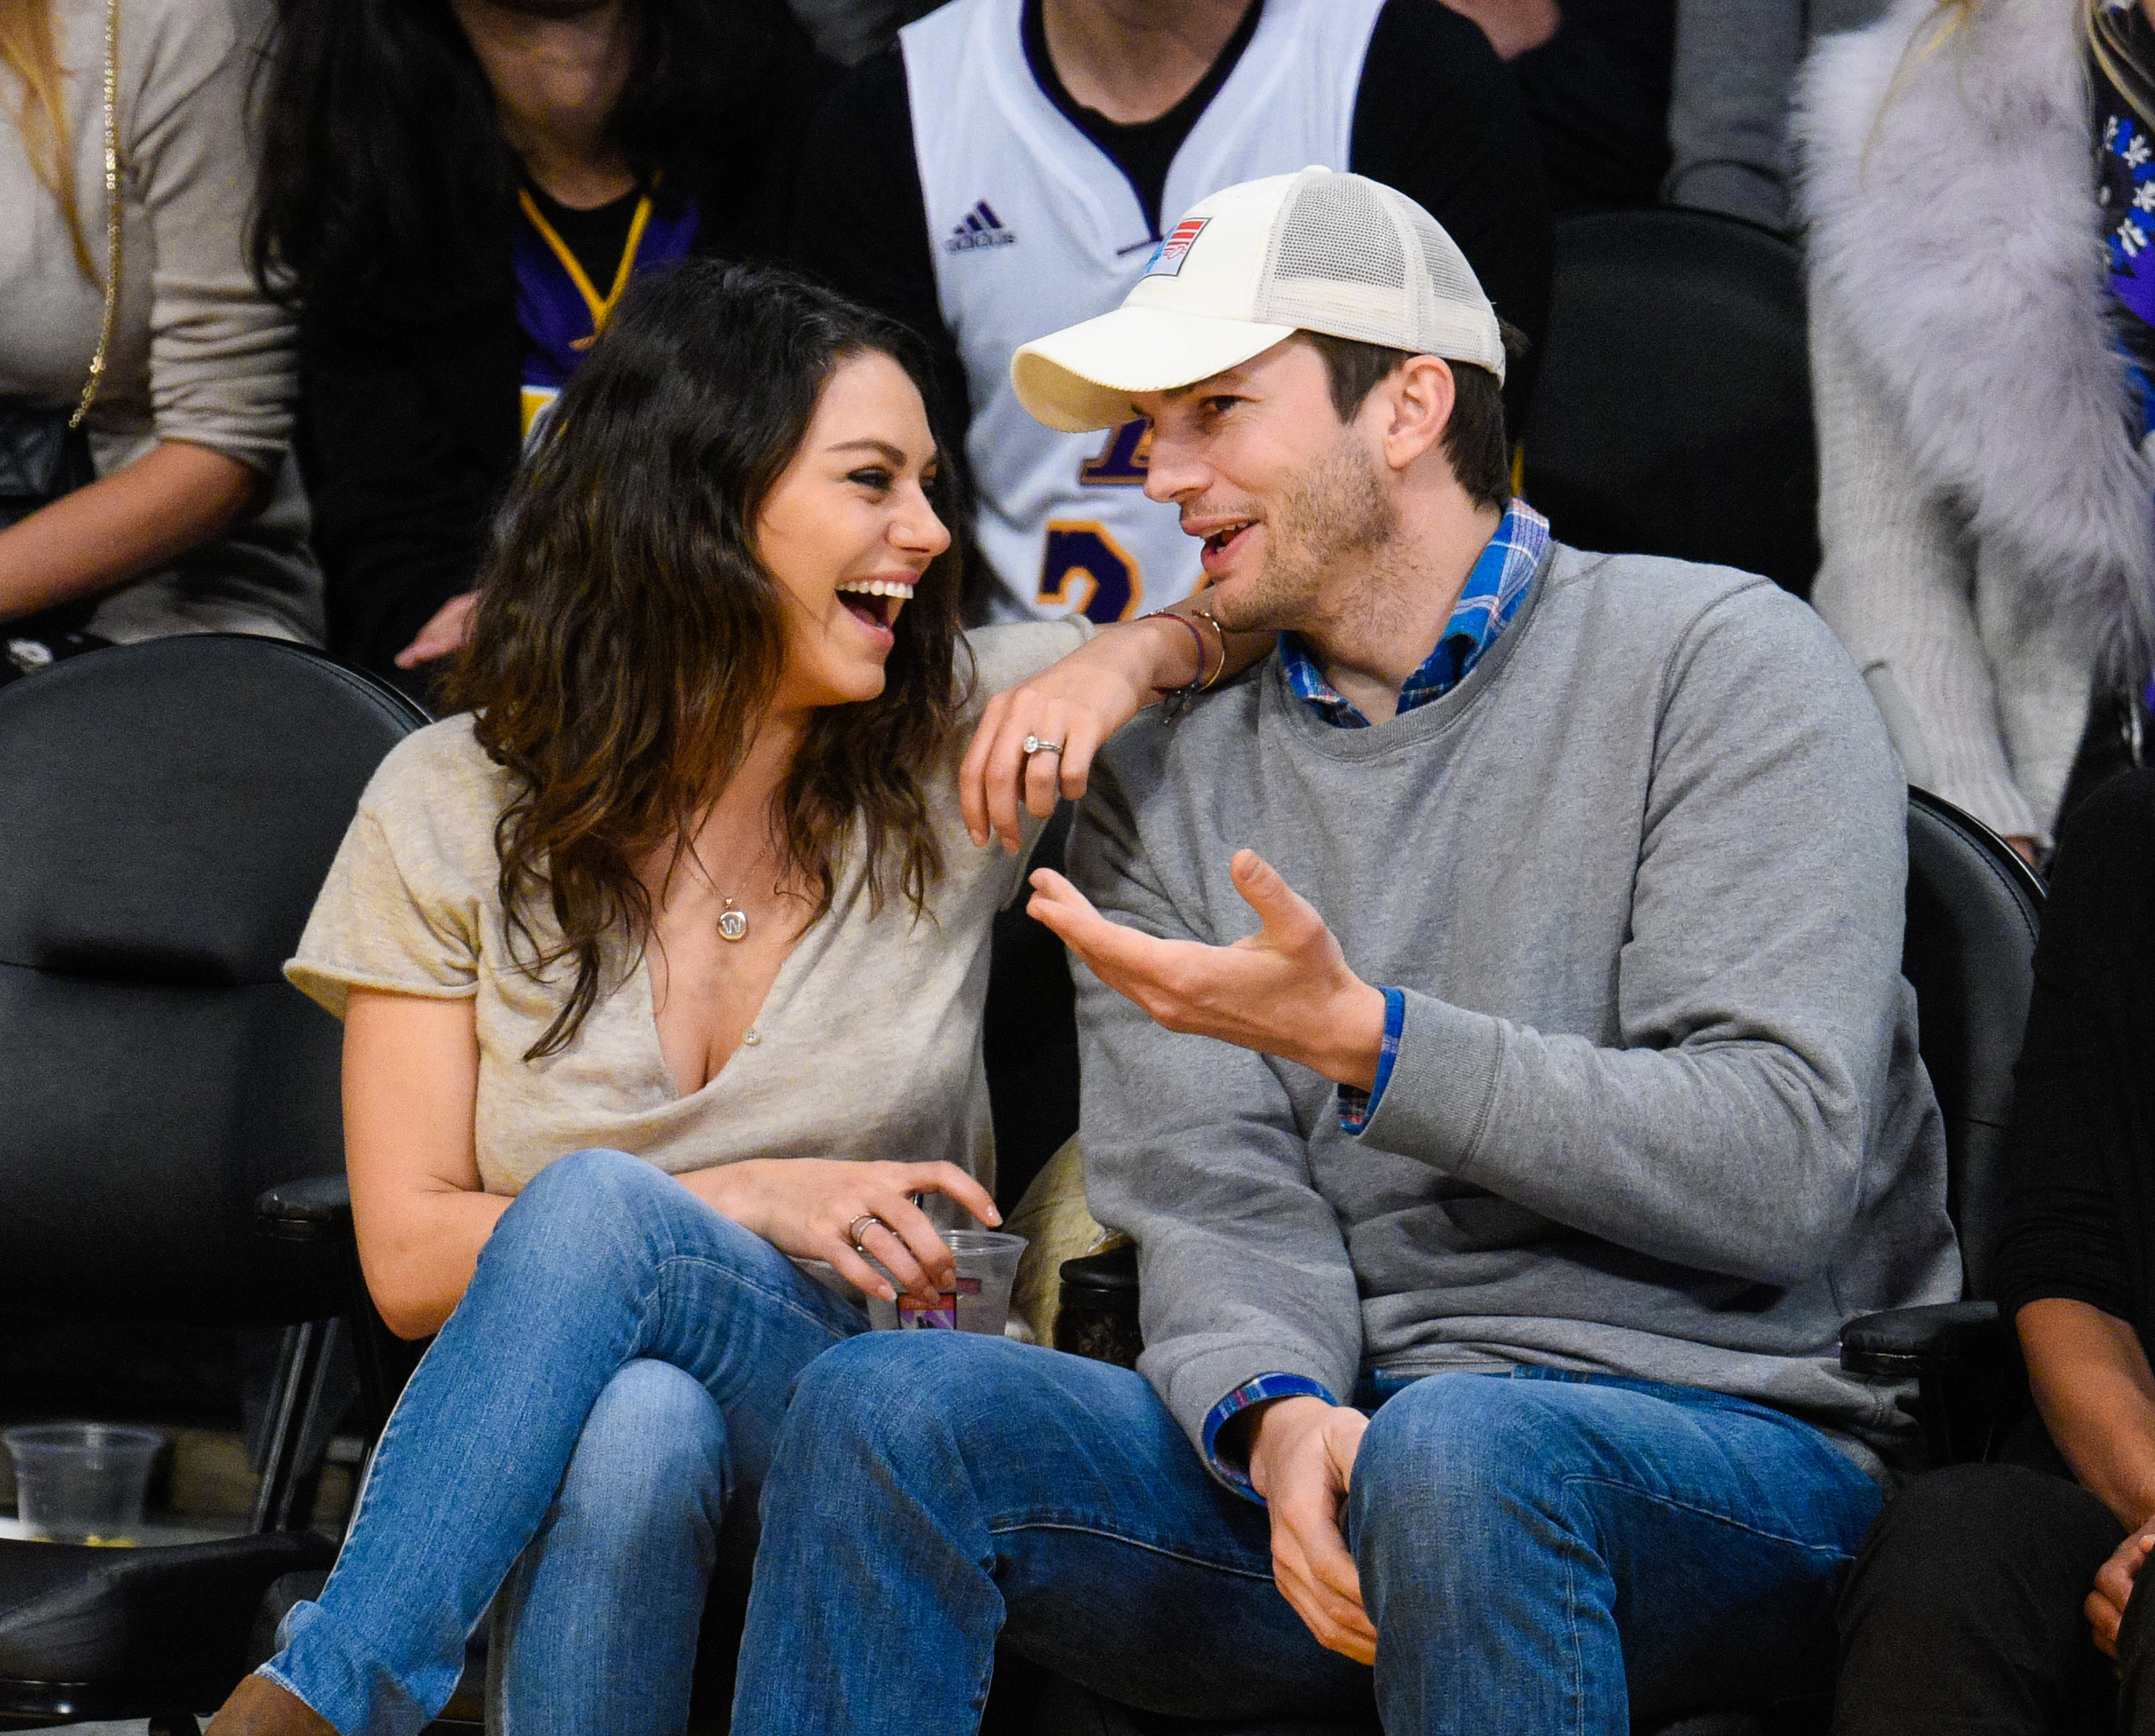 Mila and Ashton at a sports event